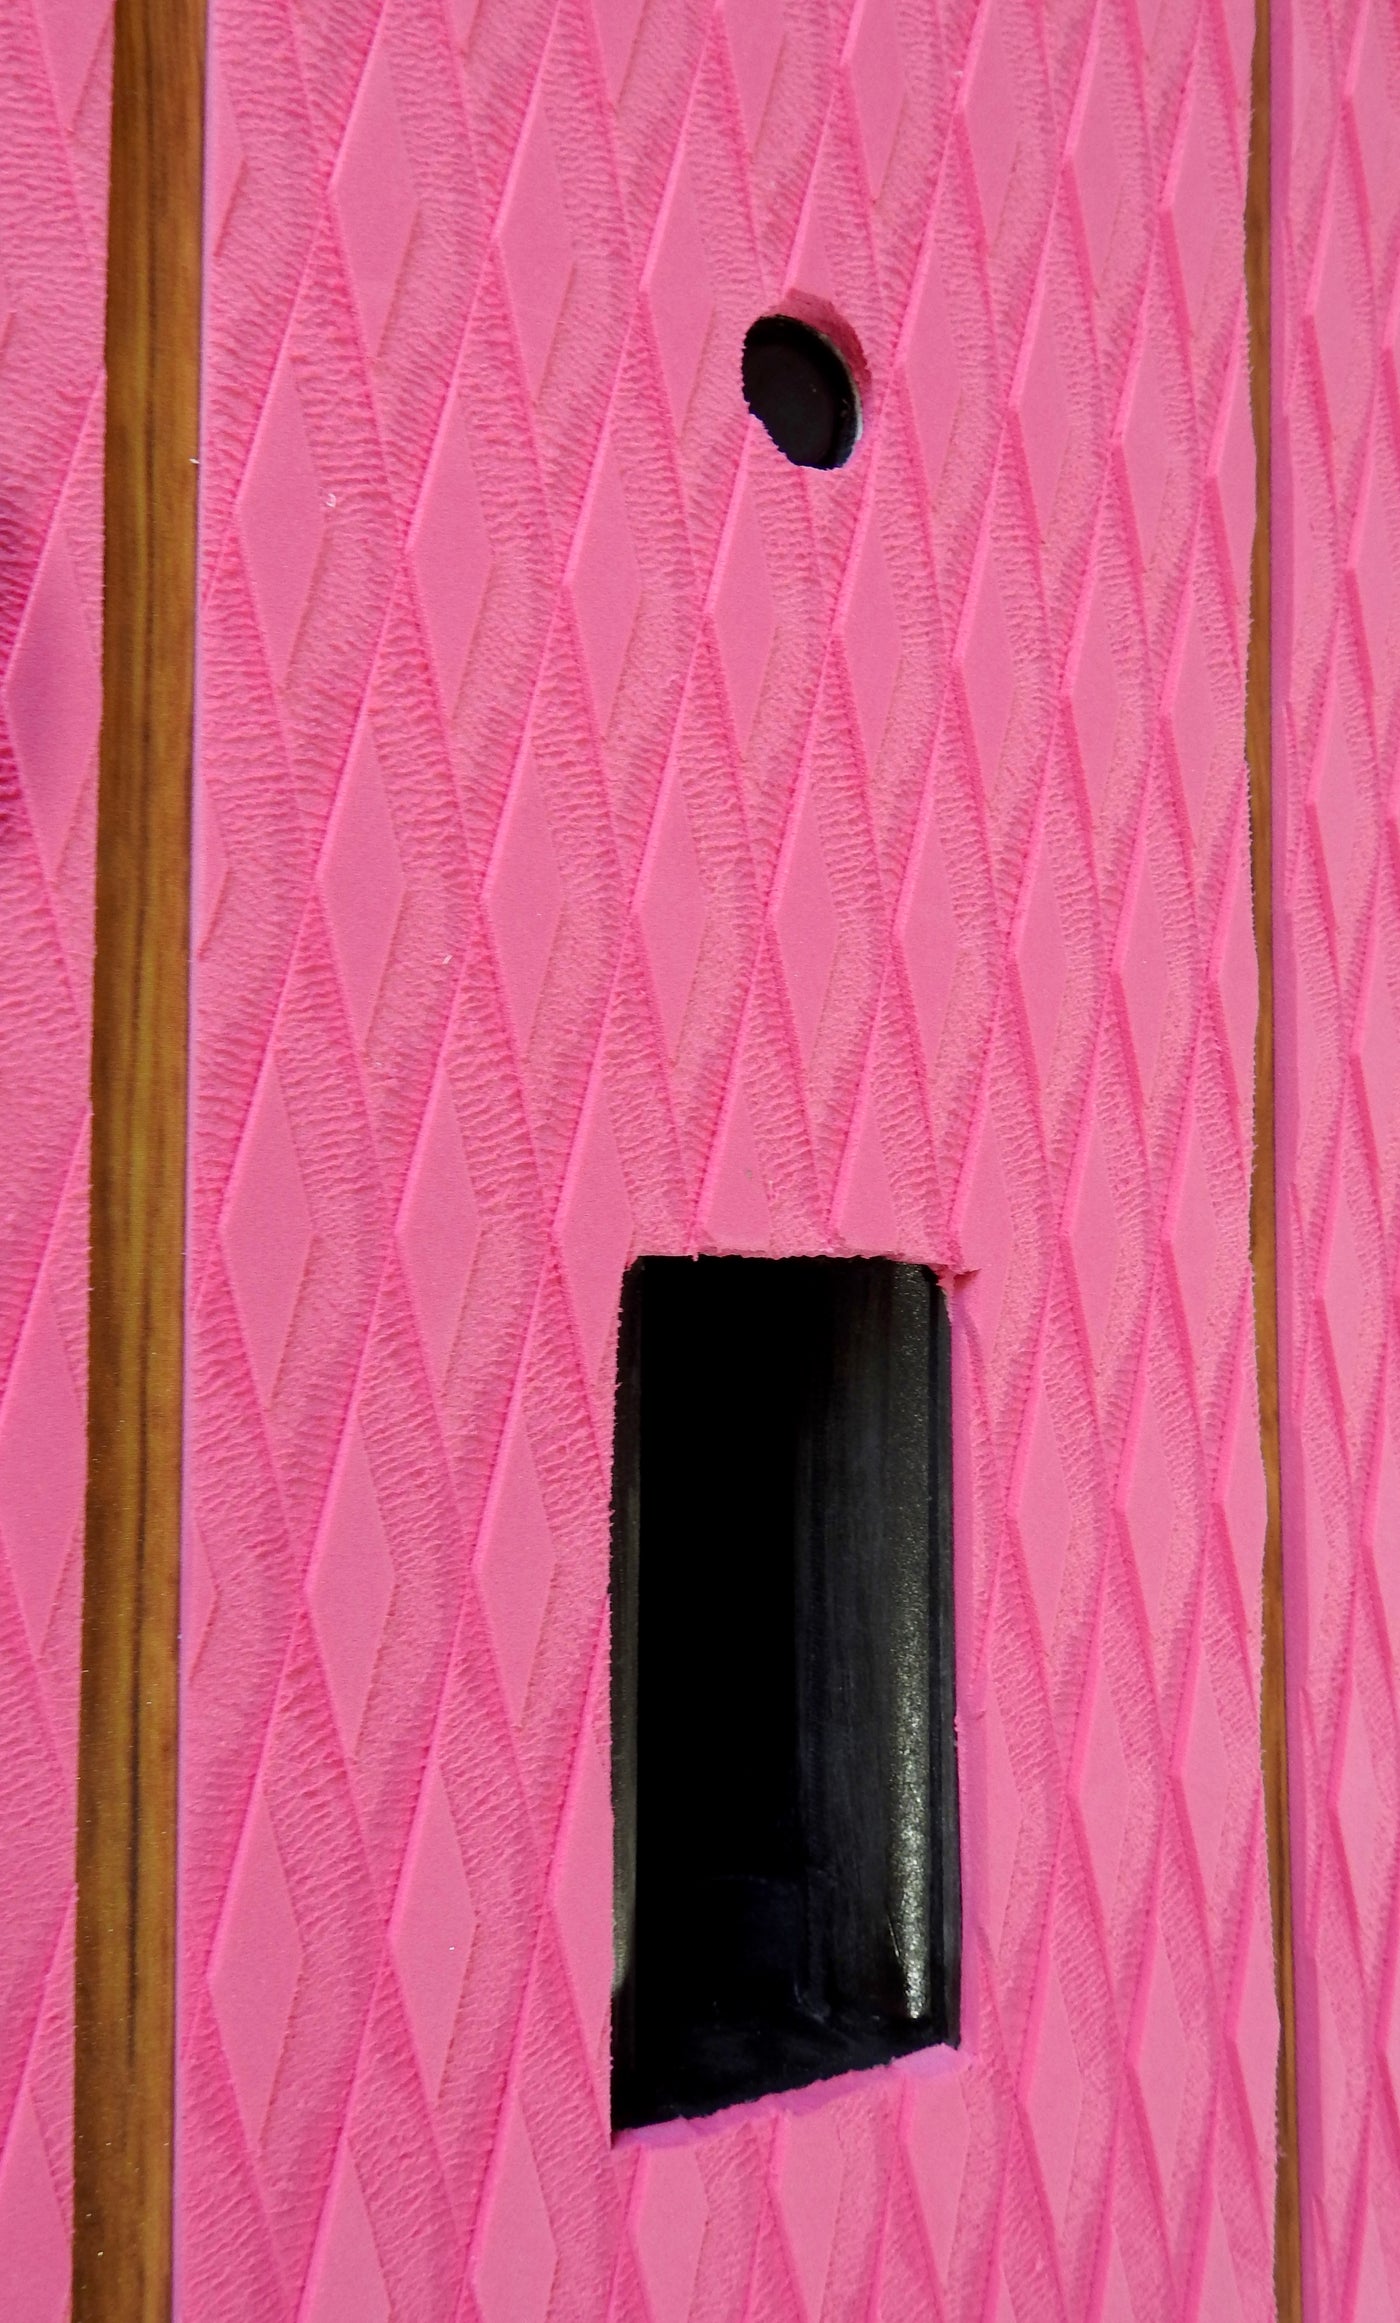 10’6” x 32” Timber Look Mint & Pink Turtle Thermo Mould Alleydesigns SUP - Alleydesigns  Pty Ltd                                             ABN: 44165571264